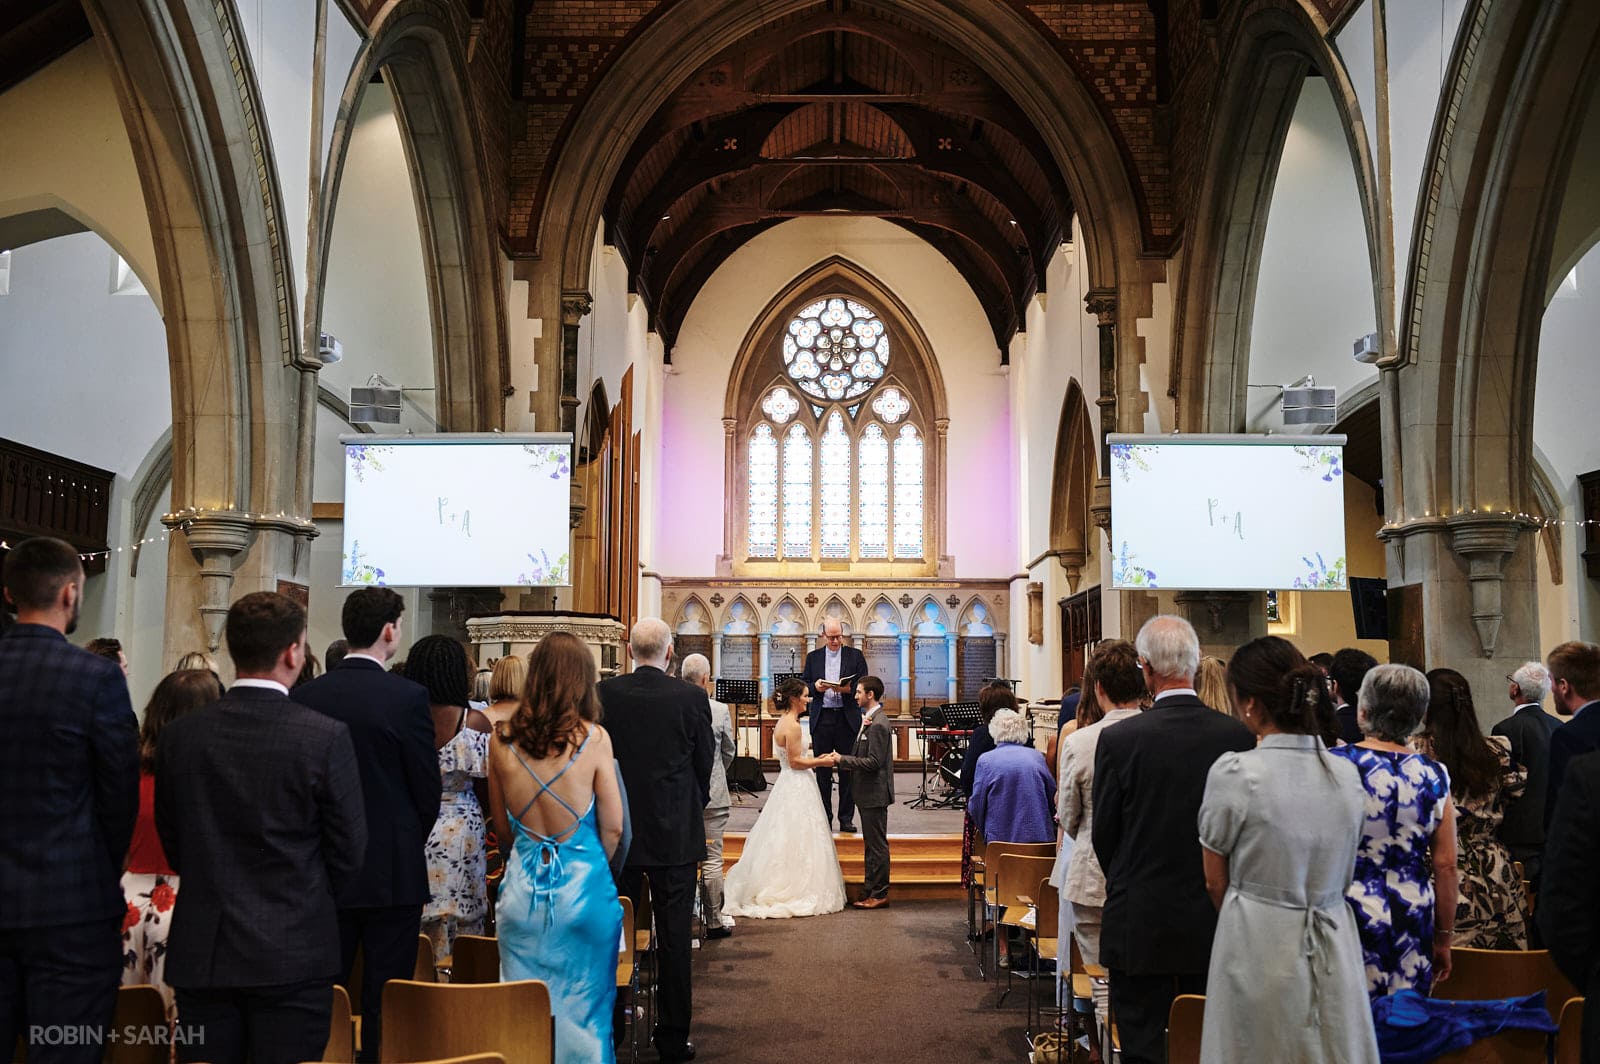 Wedding ceremony at St Pauls church in Leamington Spa